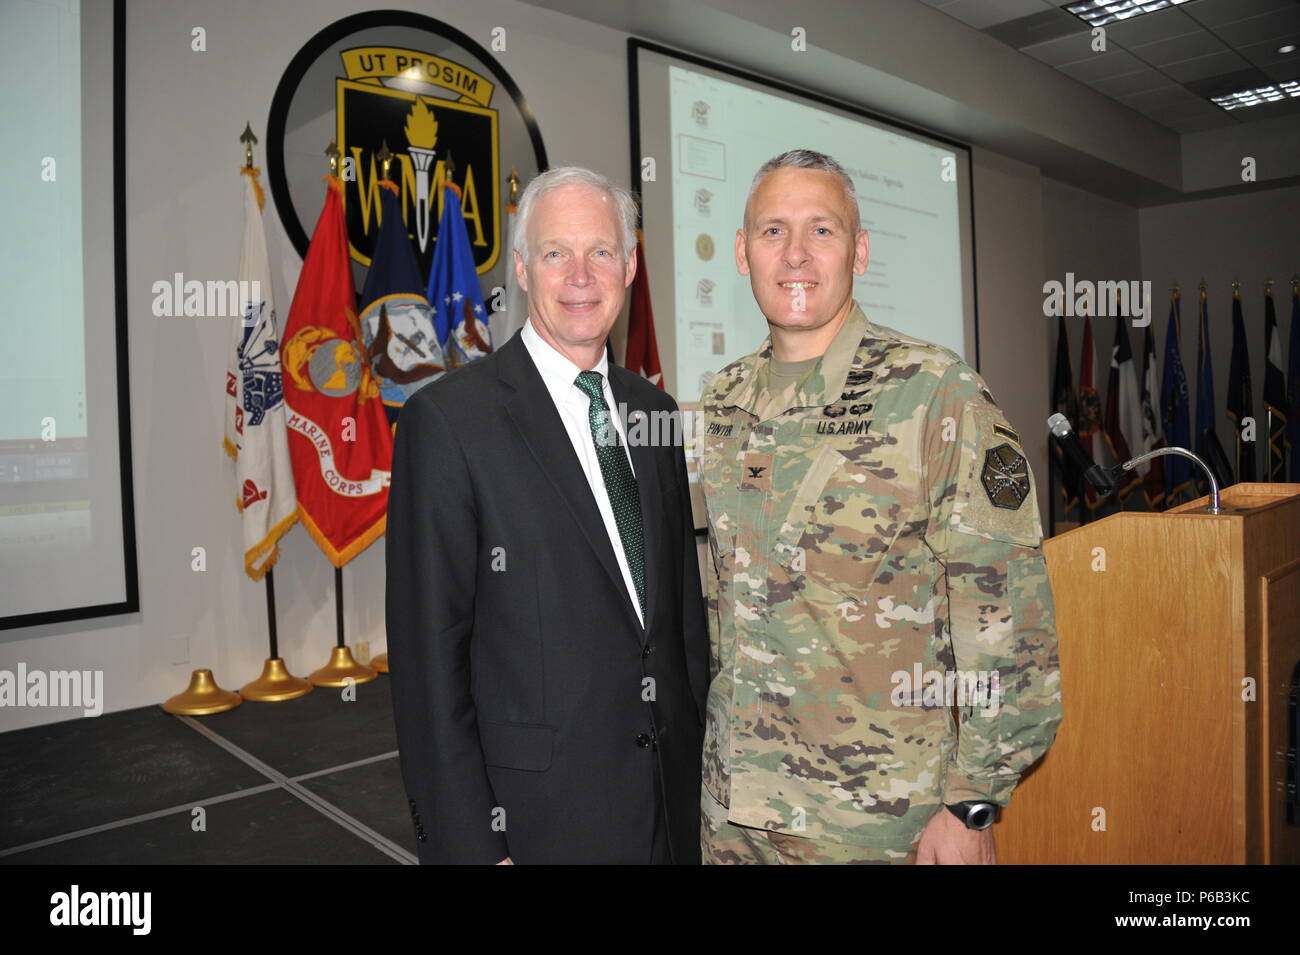 U.S. Senator Ron Johnson of Wisconsin (left) and U.S. Army Col. David Pinter pose for a photo before a ceremony honoring high school seniors who have committed to elist in the armed forces at Fort McCoy, Wis. May 21, 2016.  The event entitled 'Our Community Salutes' was held at the Wisconsin Military Academy and recognized nearly 50 youth representing all five branches of the U.S. military.  U.S. Army photo by Jamal Wilson Stock Photo